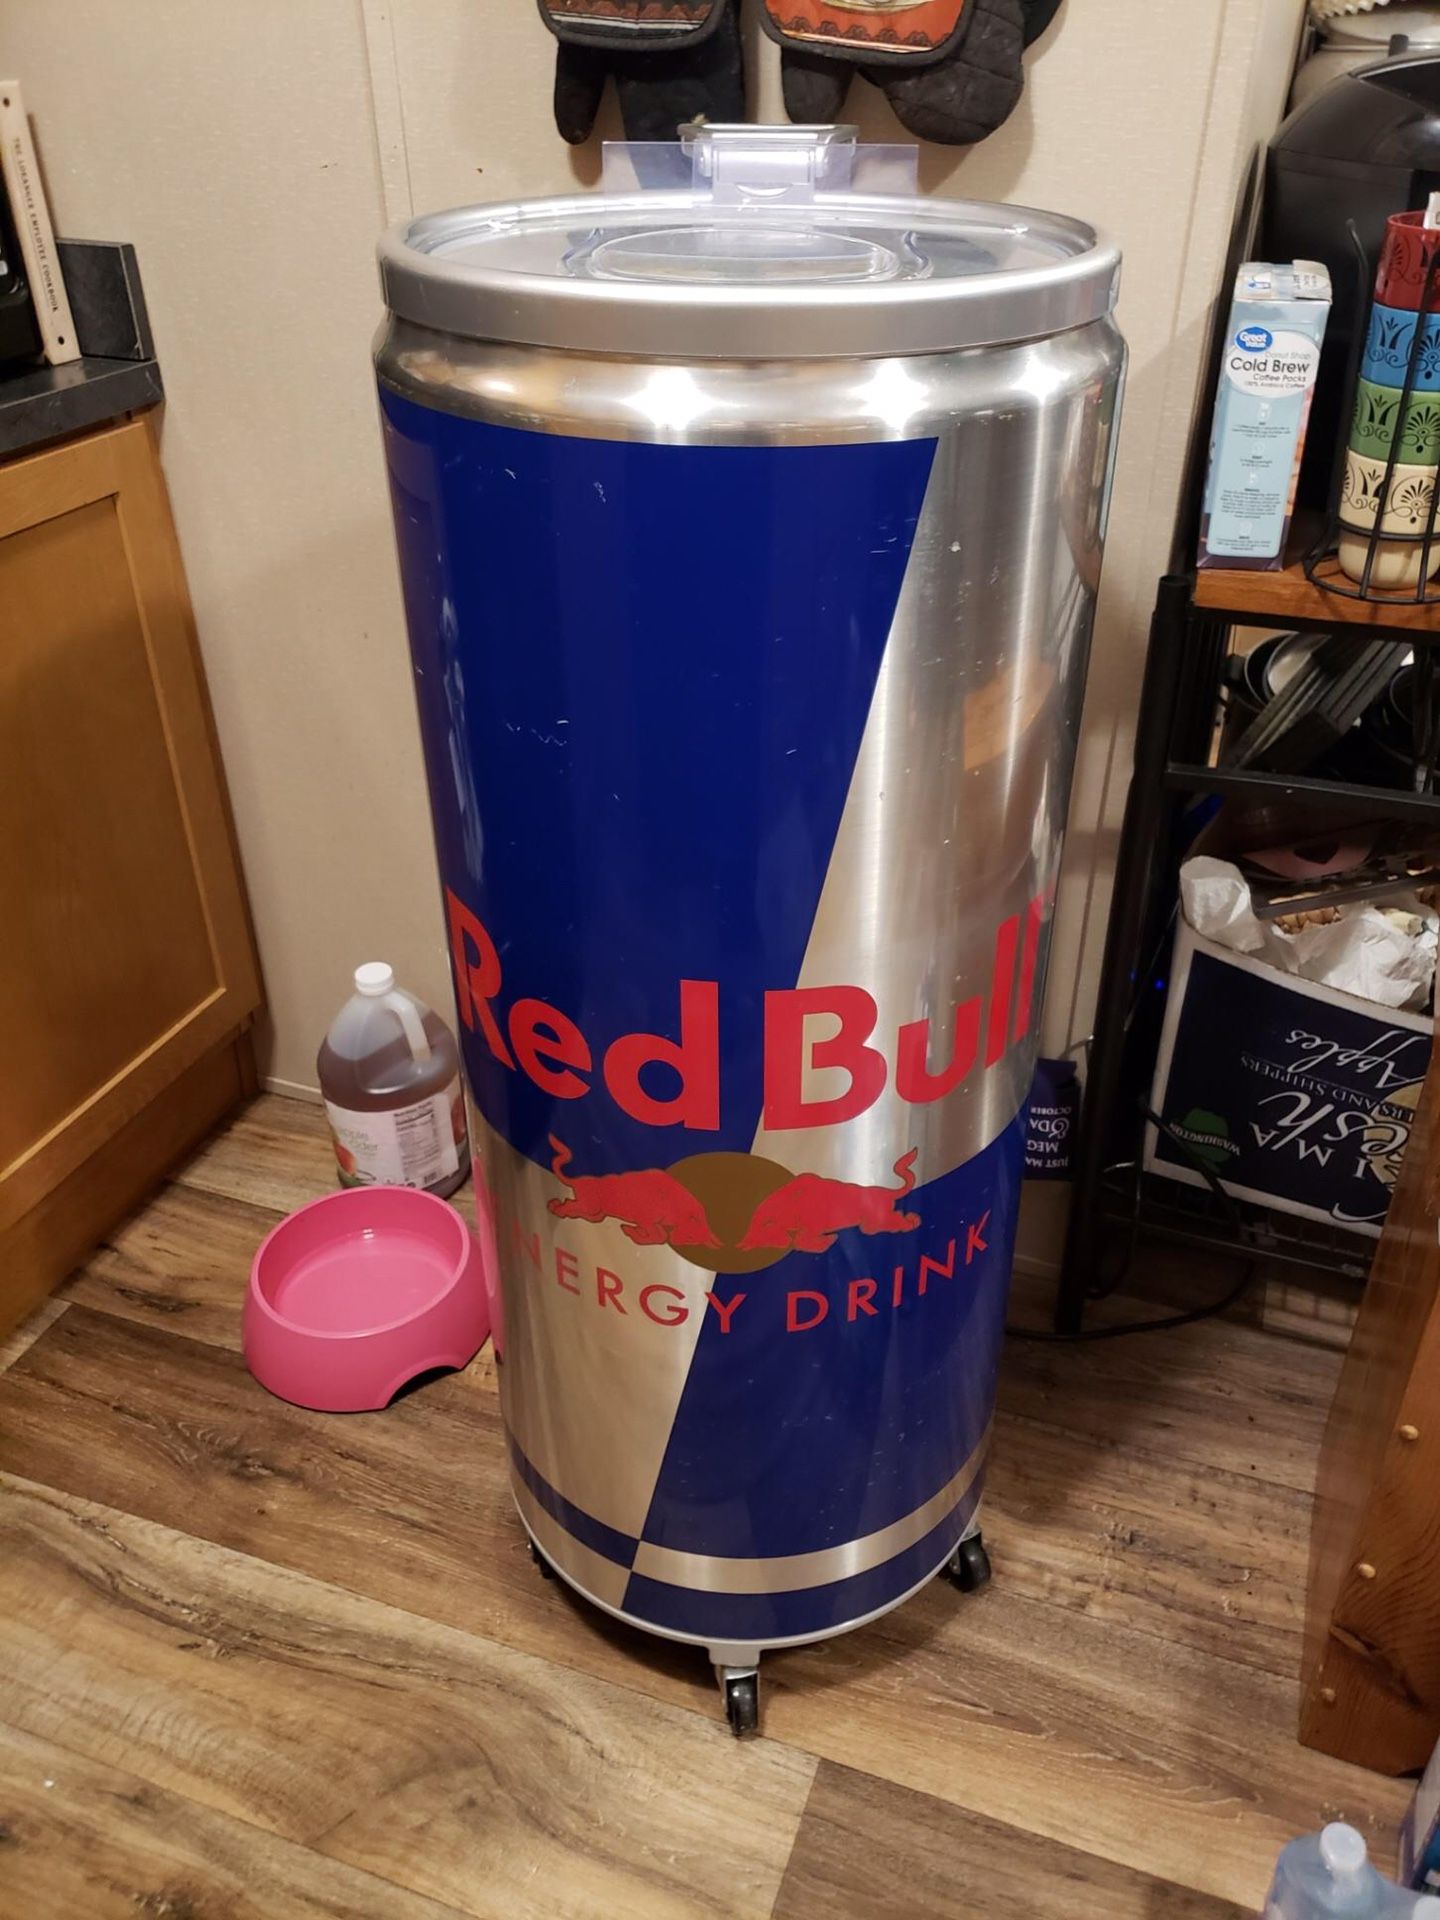 Redbull electric drink cooler